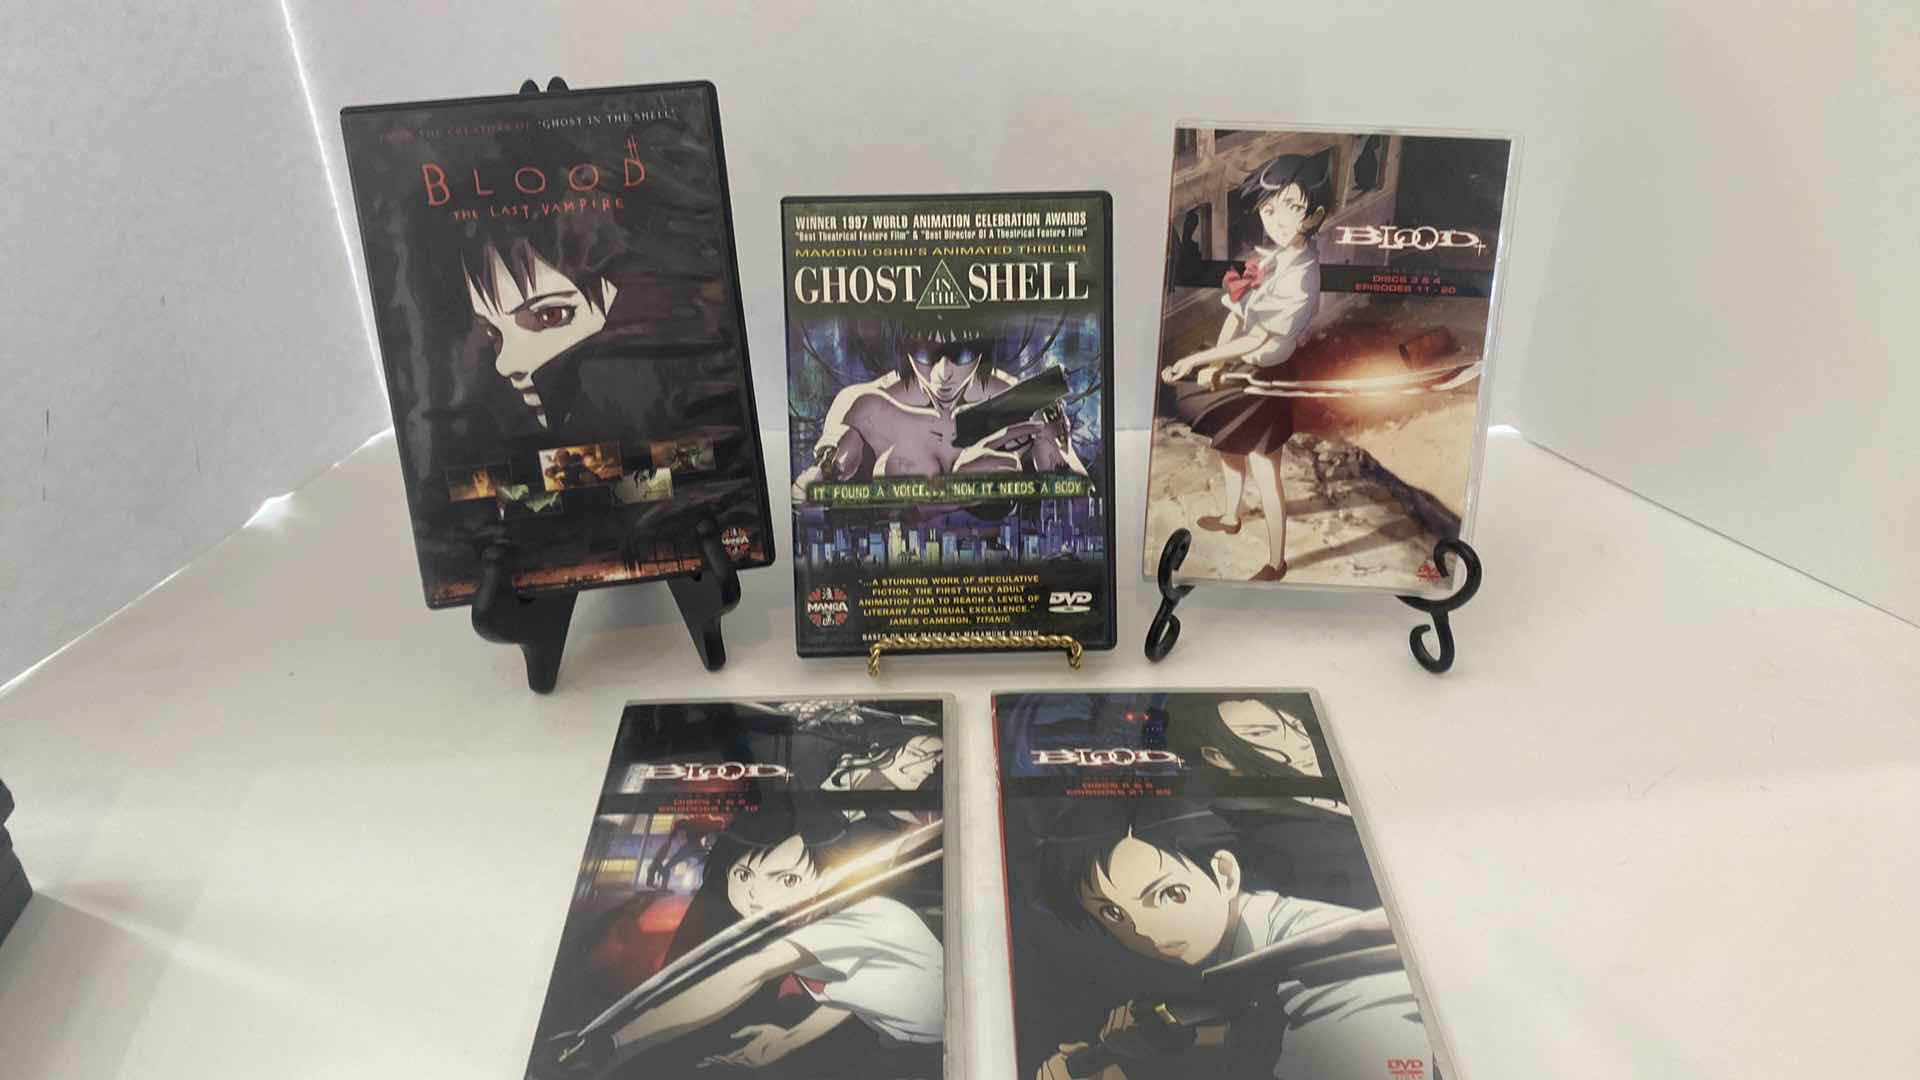 Photo 1 of 5-DVDS BLOOD EPISODES 1-26 AND GHOST IN THE SHELL (ANIME)